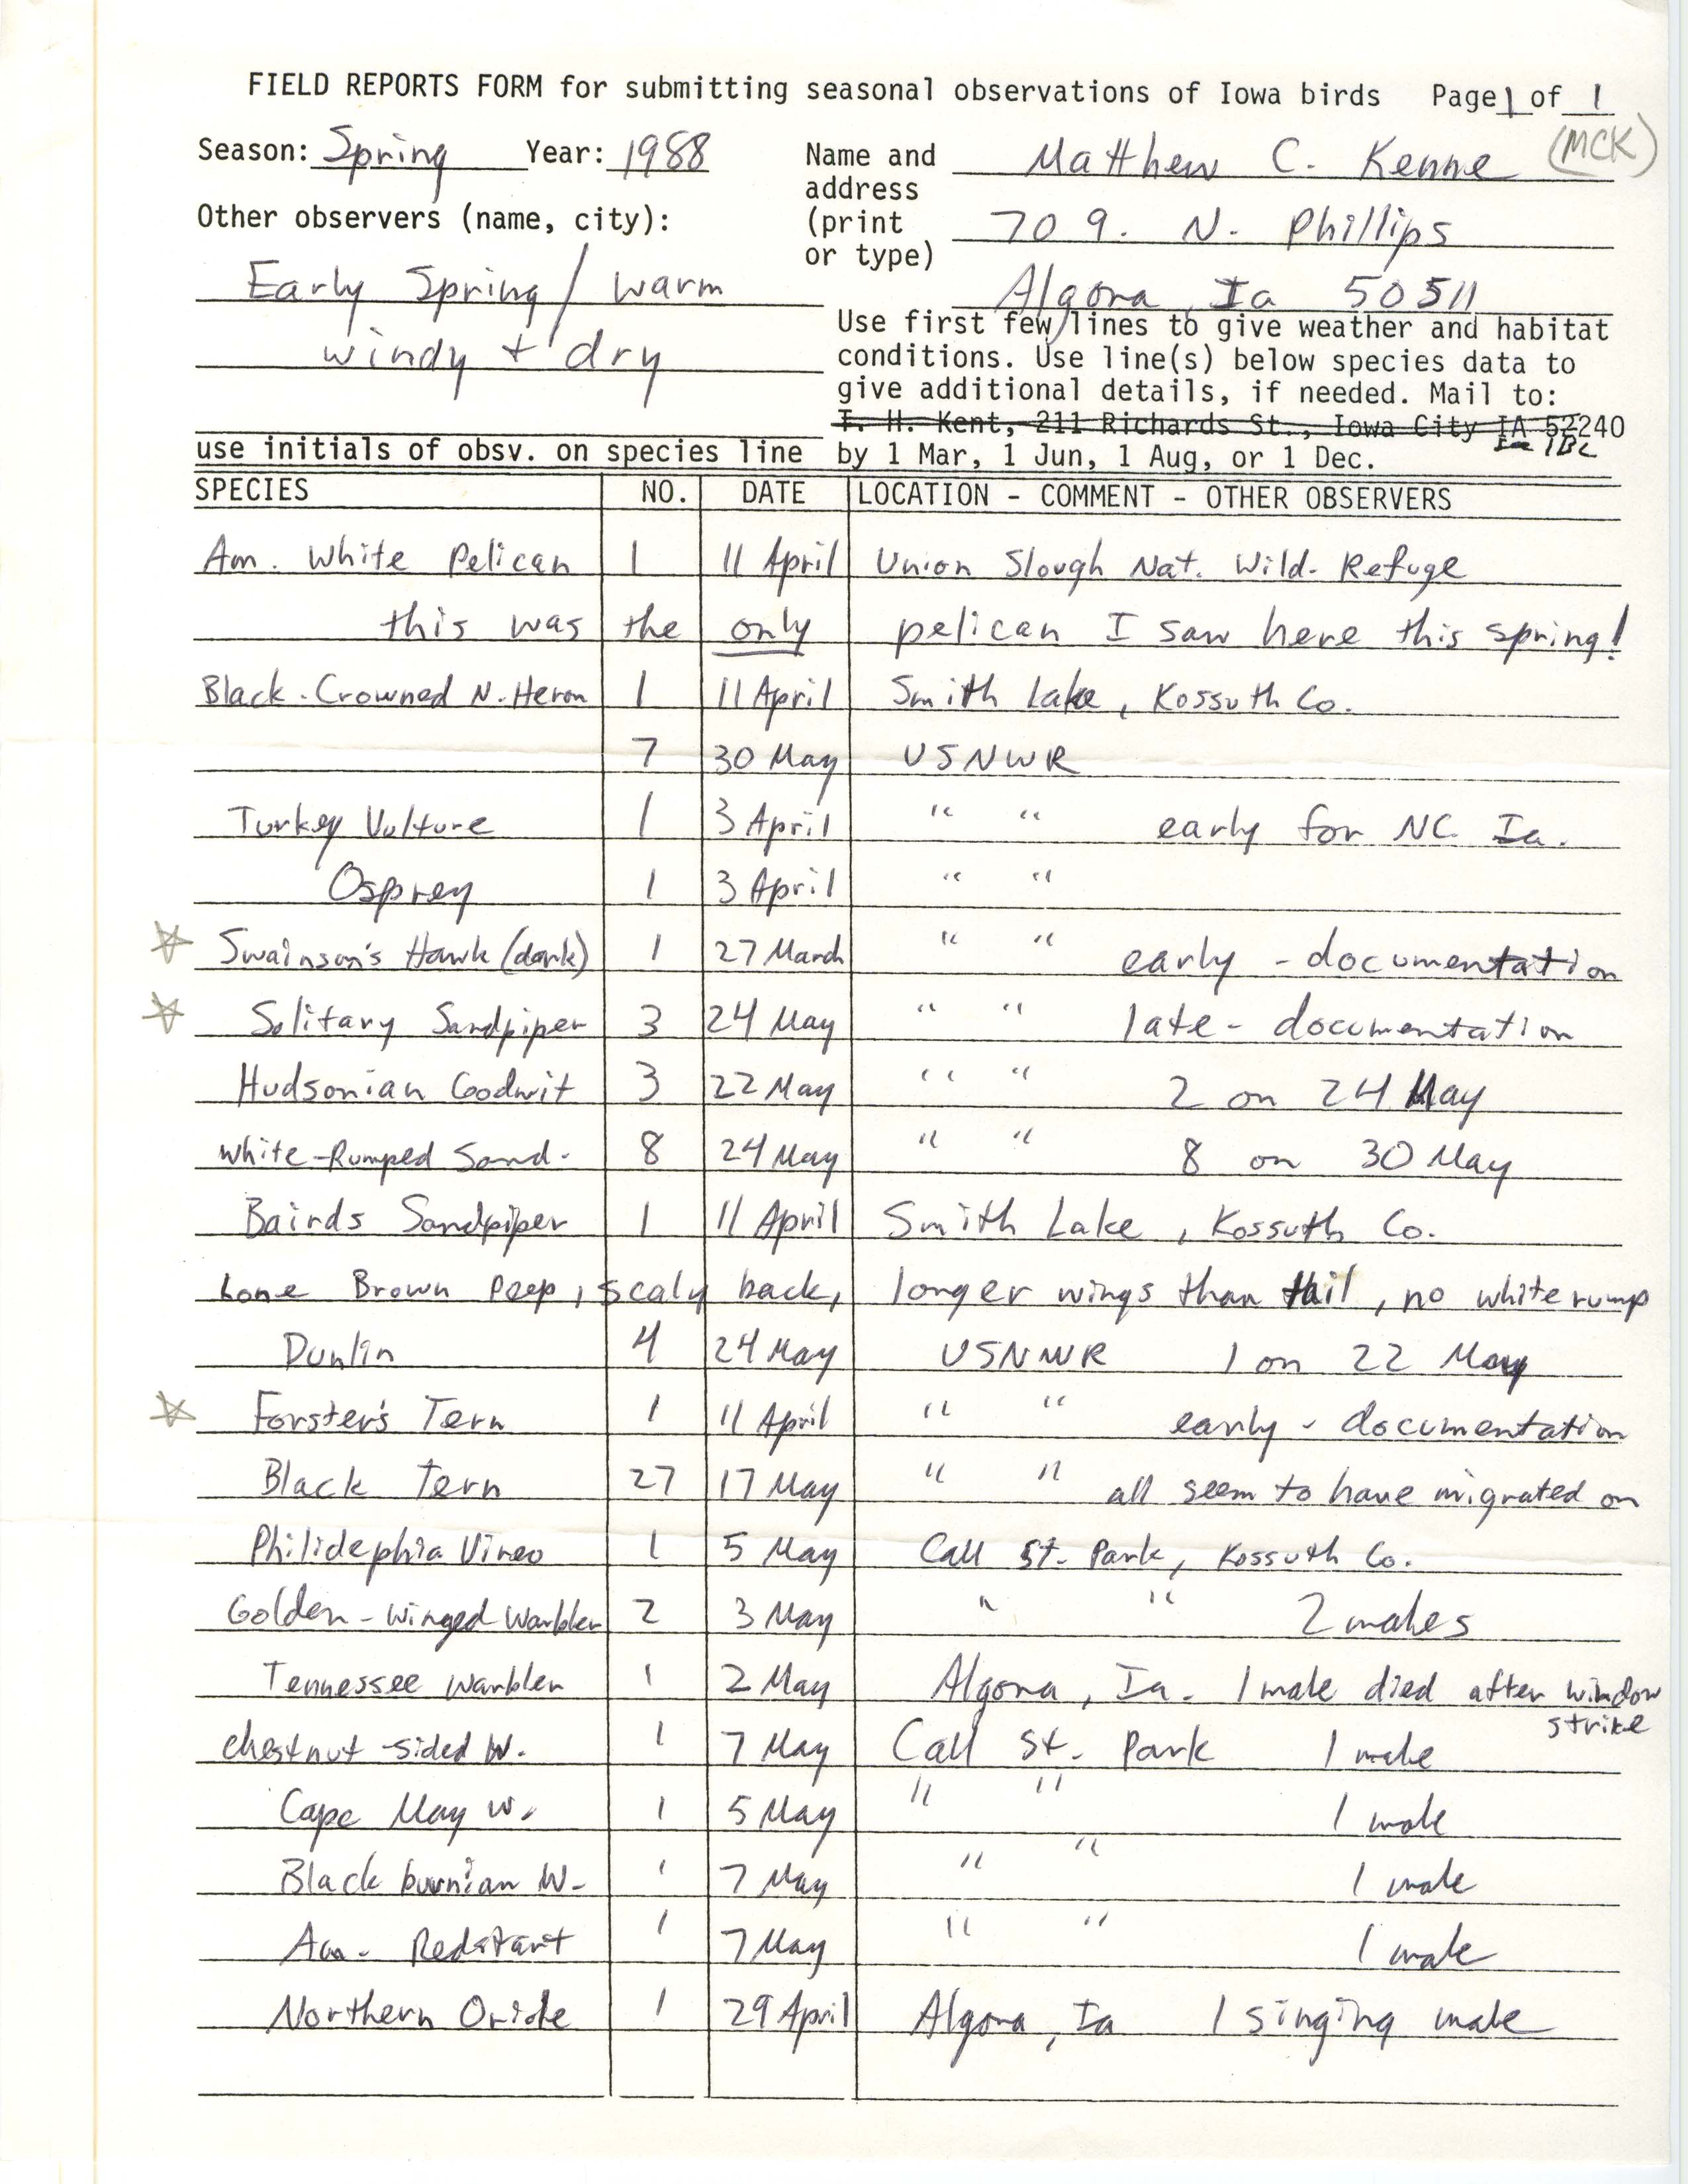 Field reports form for submitting seasonal observations of Iowa birds, Matthew Kenne, spring 1988